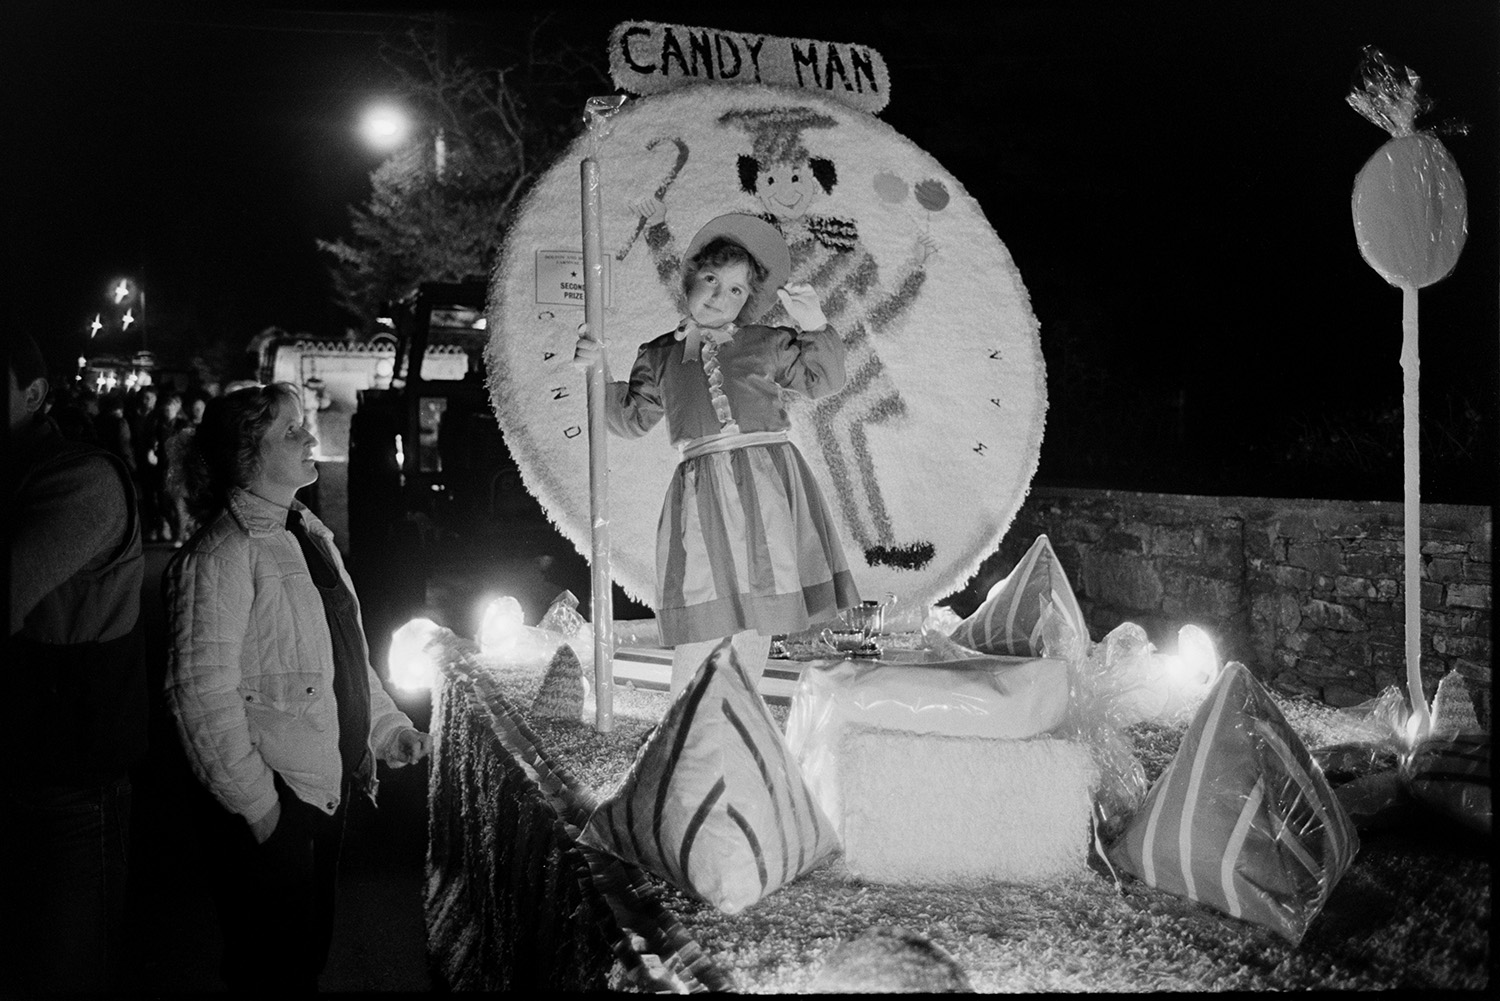 Carnival floats at night, Queen and attendants, fancy dress.
[A carnival float during the evening procession at Dolton Carnival. A young girl is standing in fancy dress on a float called Candy Man. A woman stands beside the decorated float, with lights and spectators in the background.]